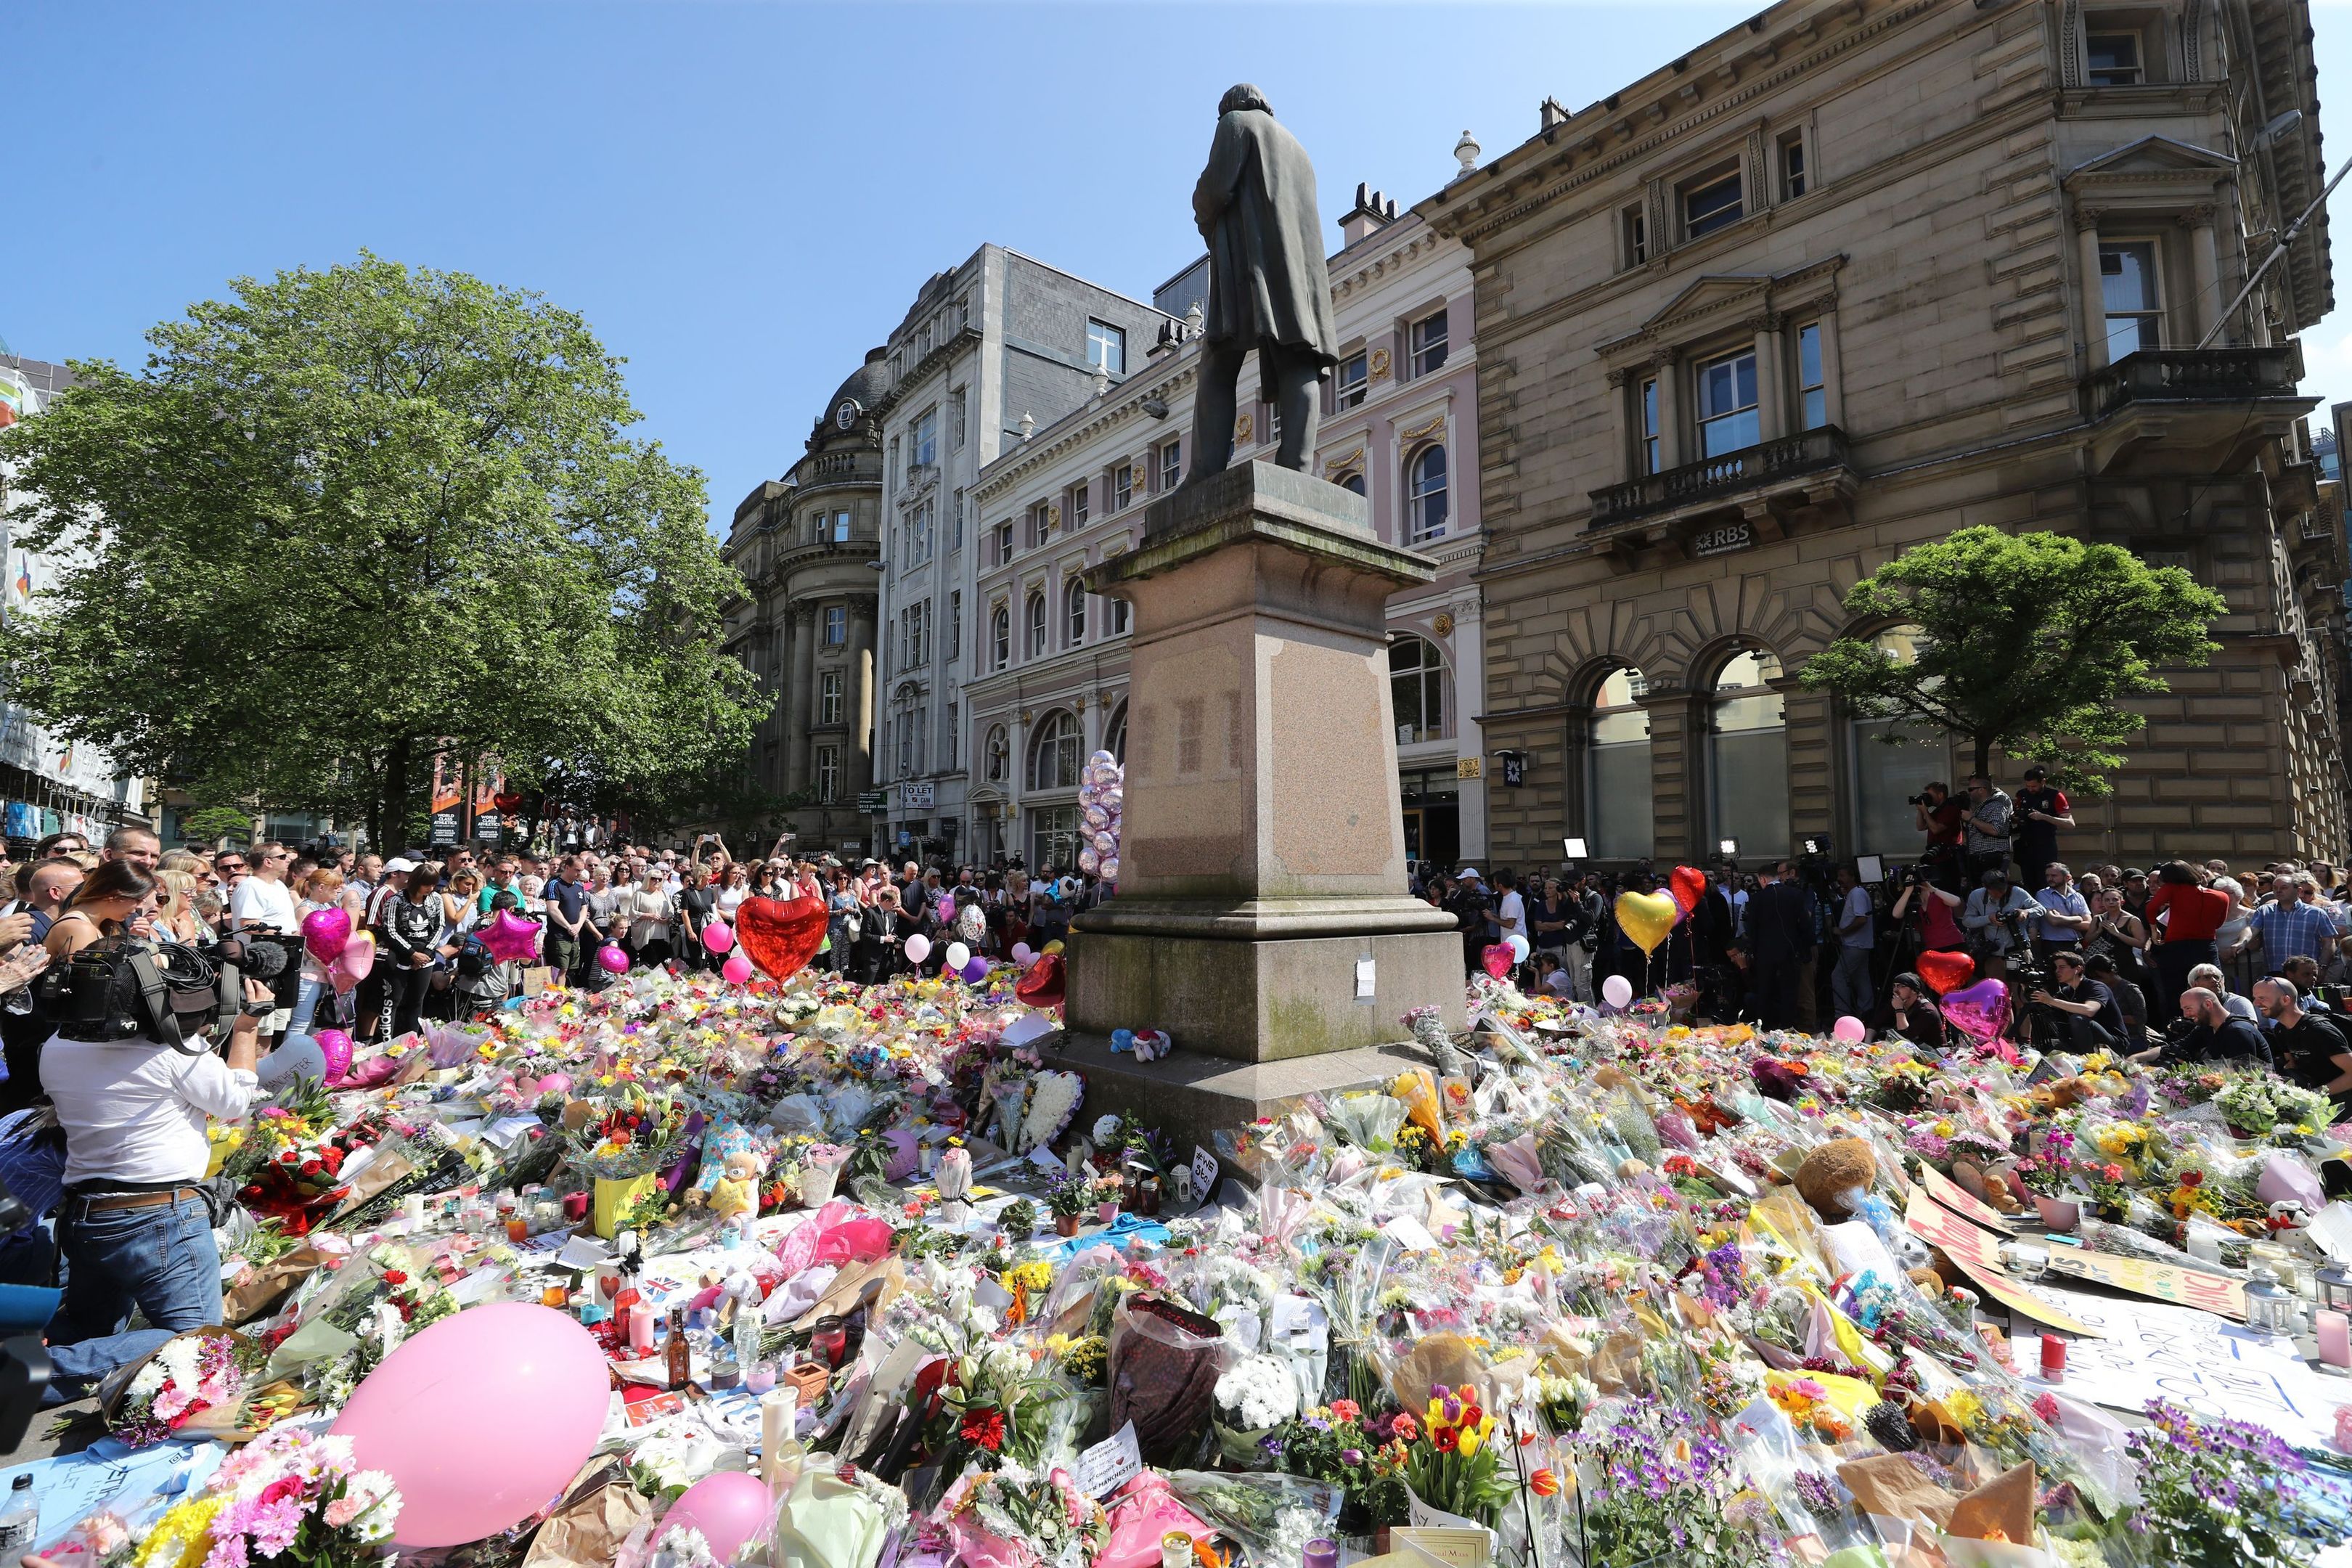 People observe a minute's silence in St Ann's Square, Manchester, to remember the victims of the terror attack in the city earlier this week. (Owen Humphreys/PA Wire)